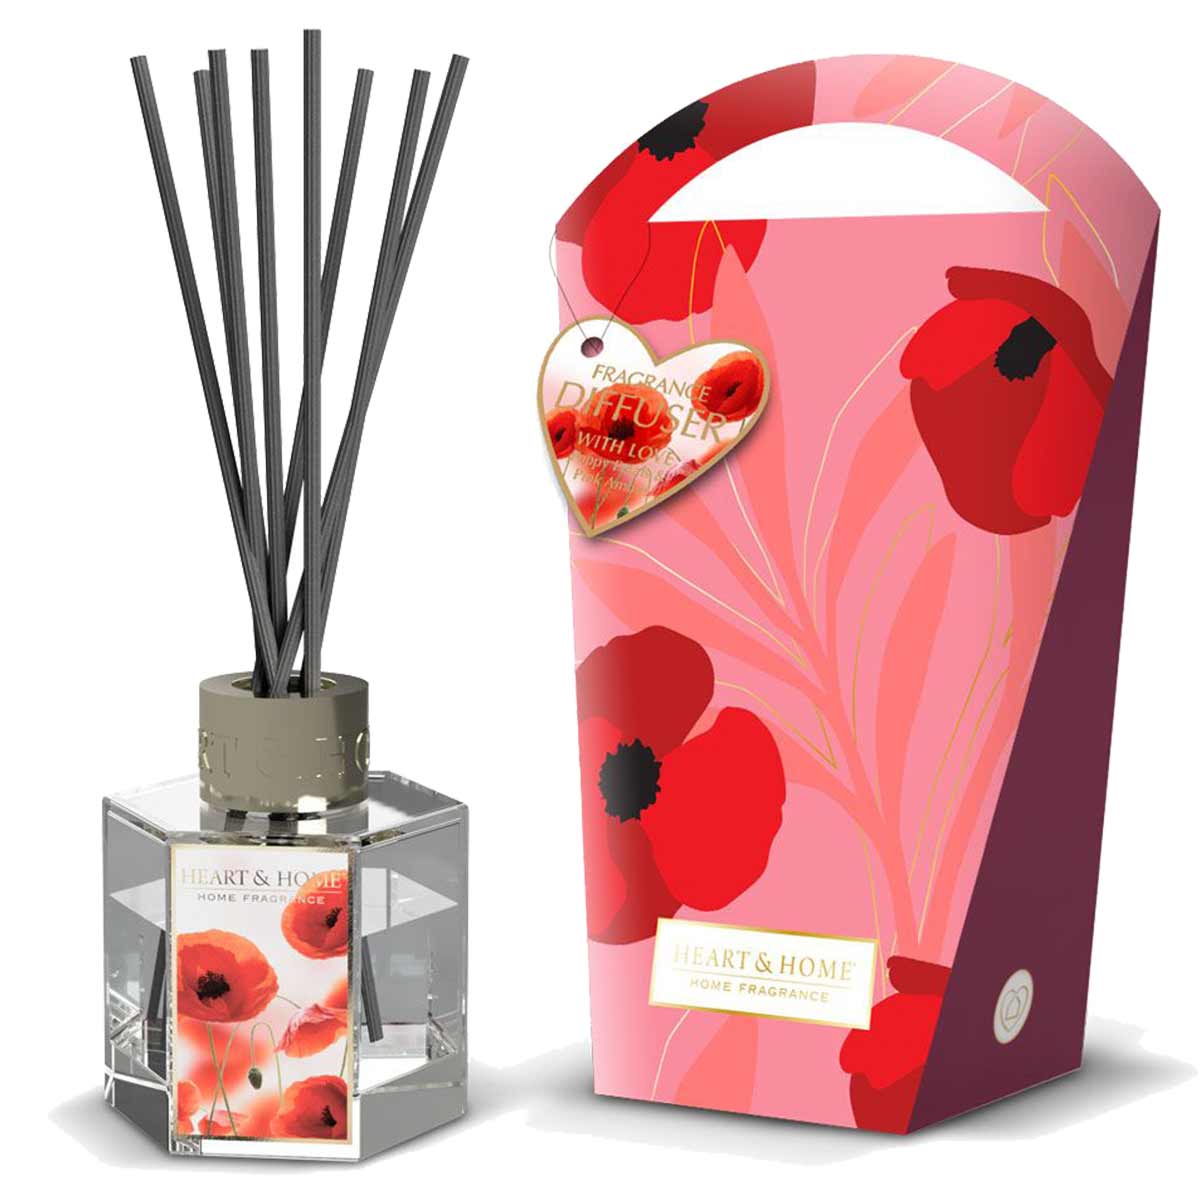 Heart and Home Stick Diffuser - With Love